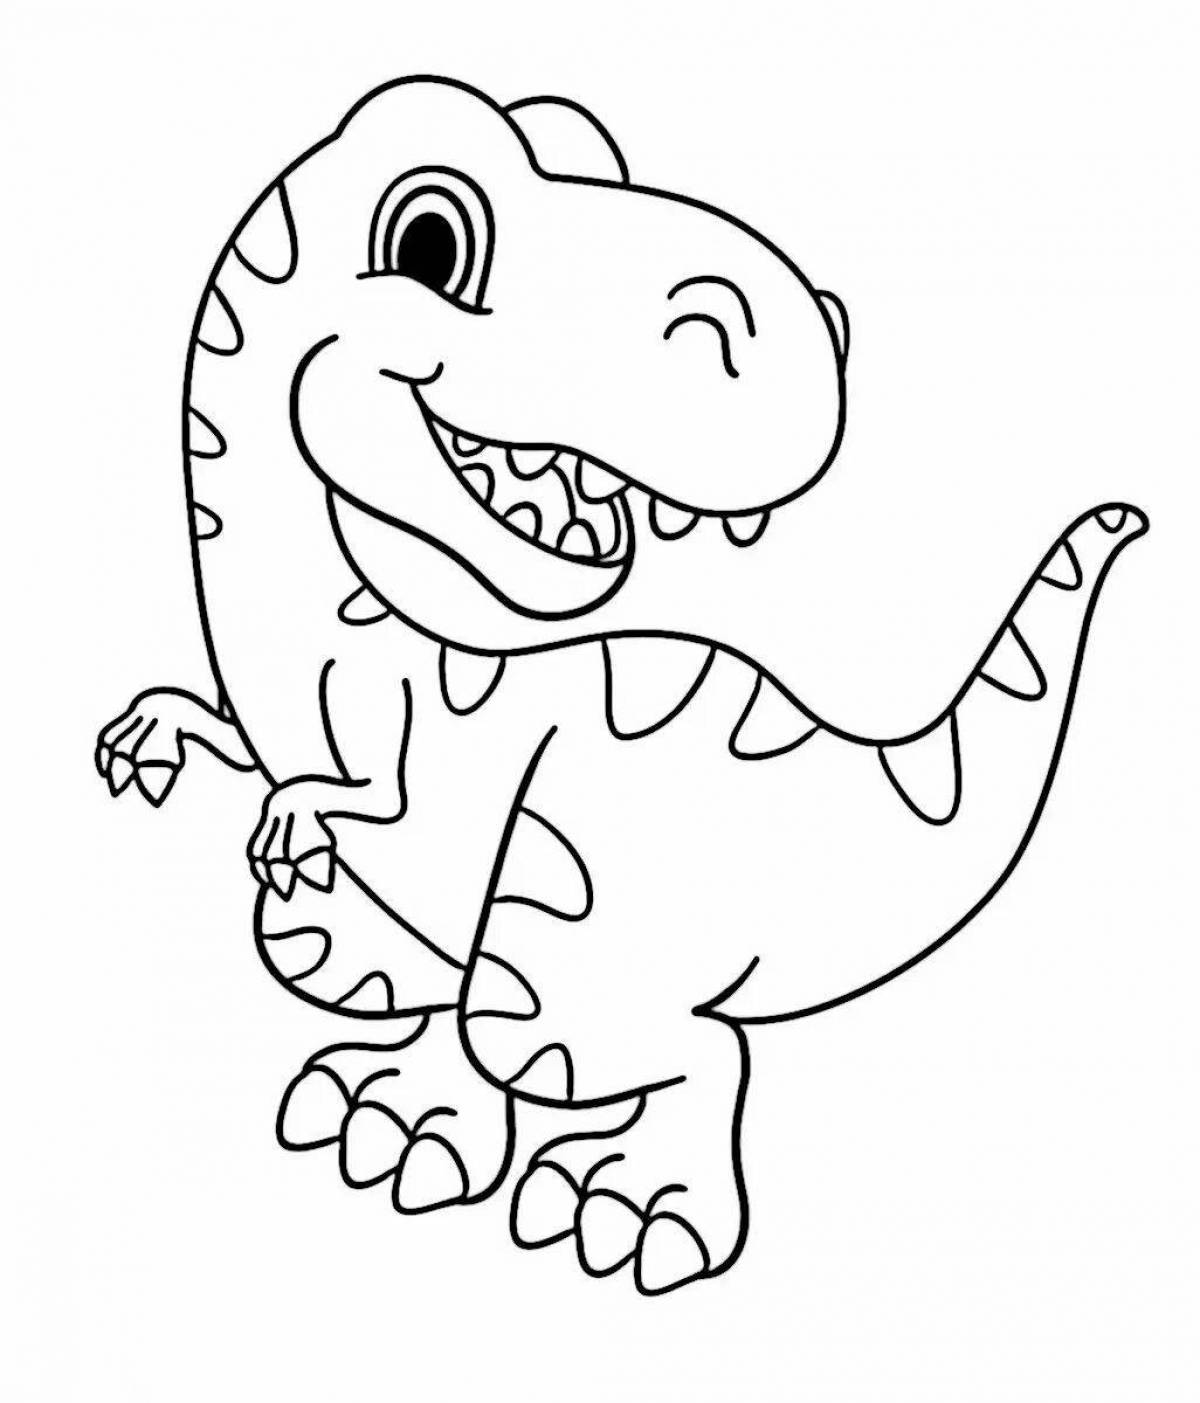 Wonderful tyrannosaurus coloring pages for kids